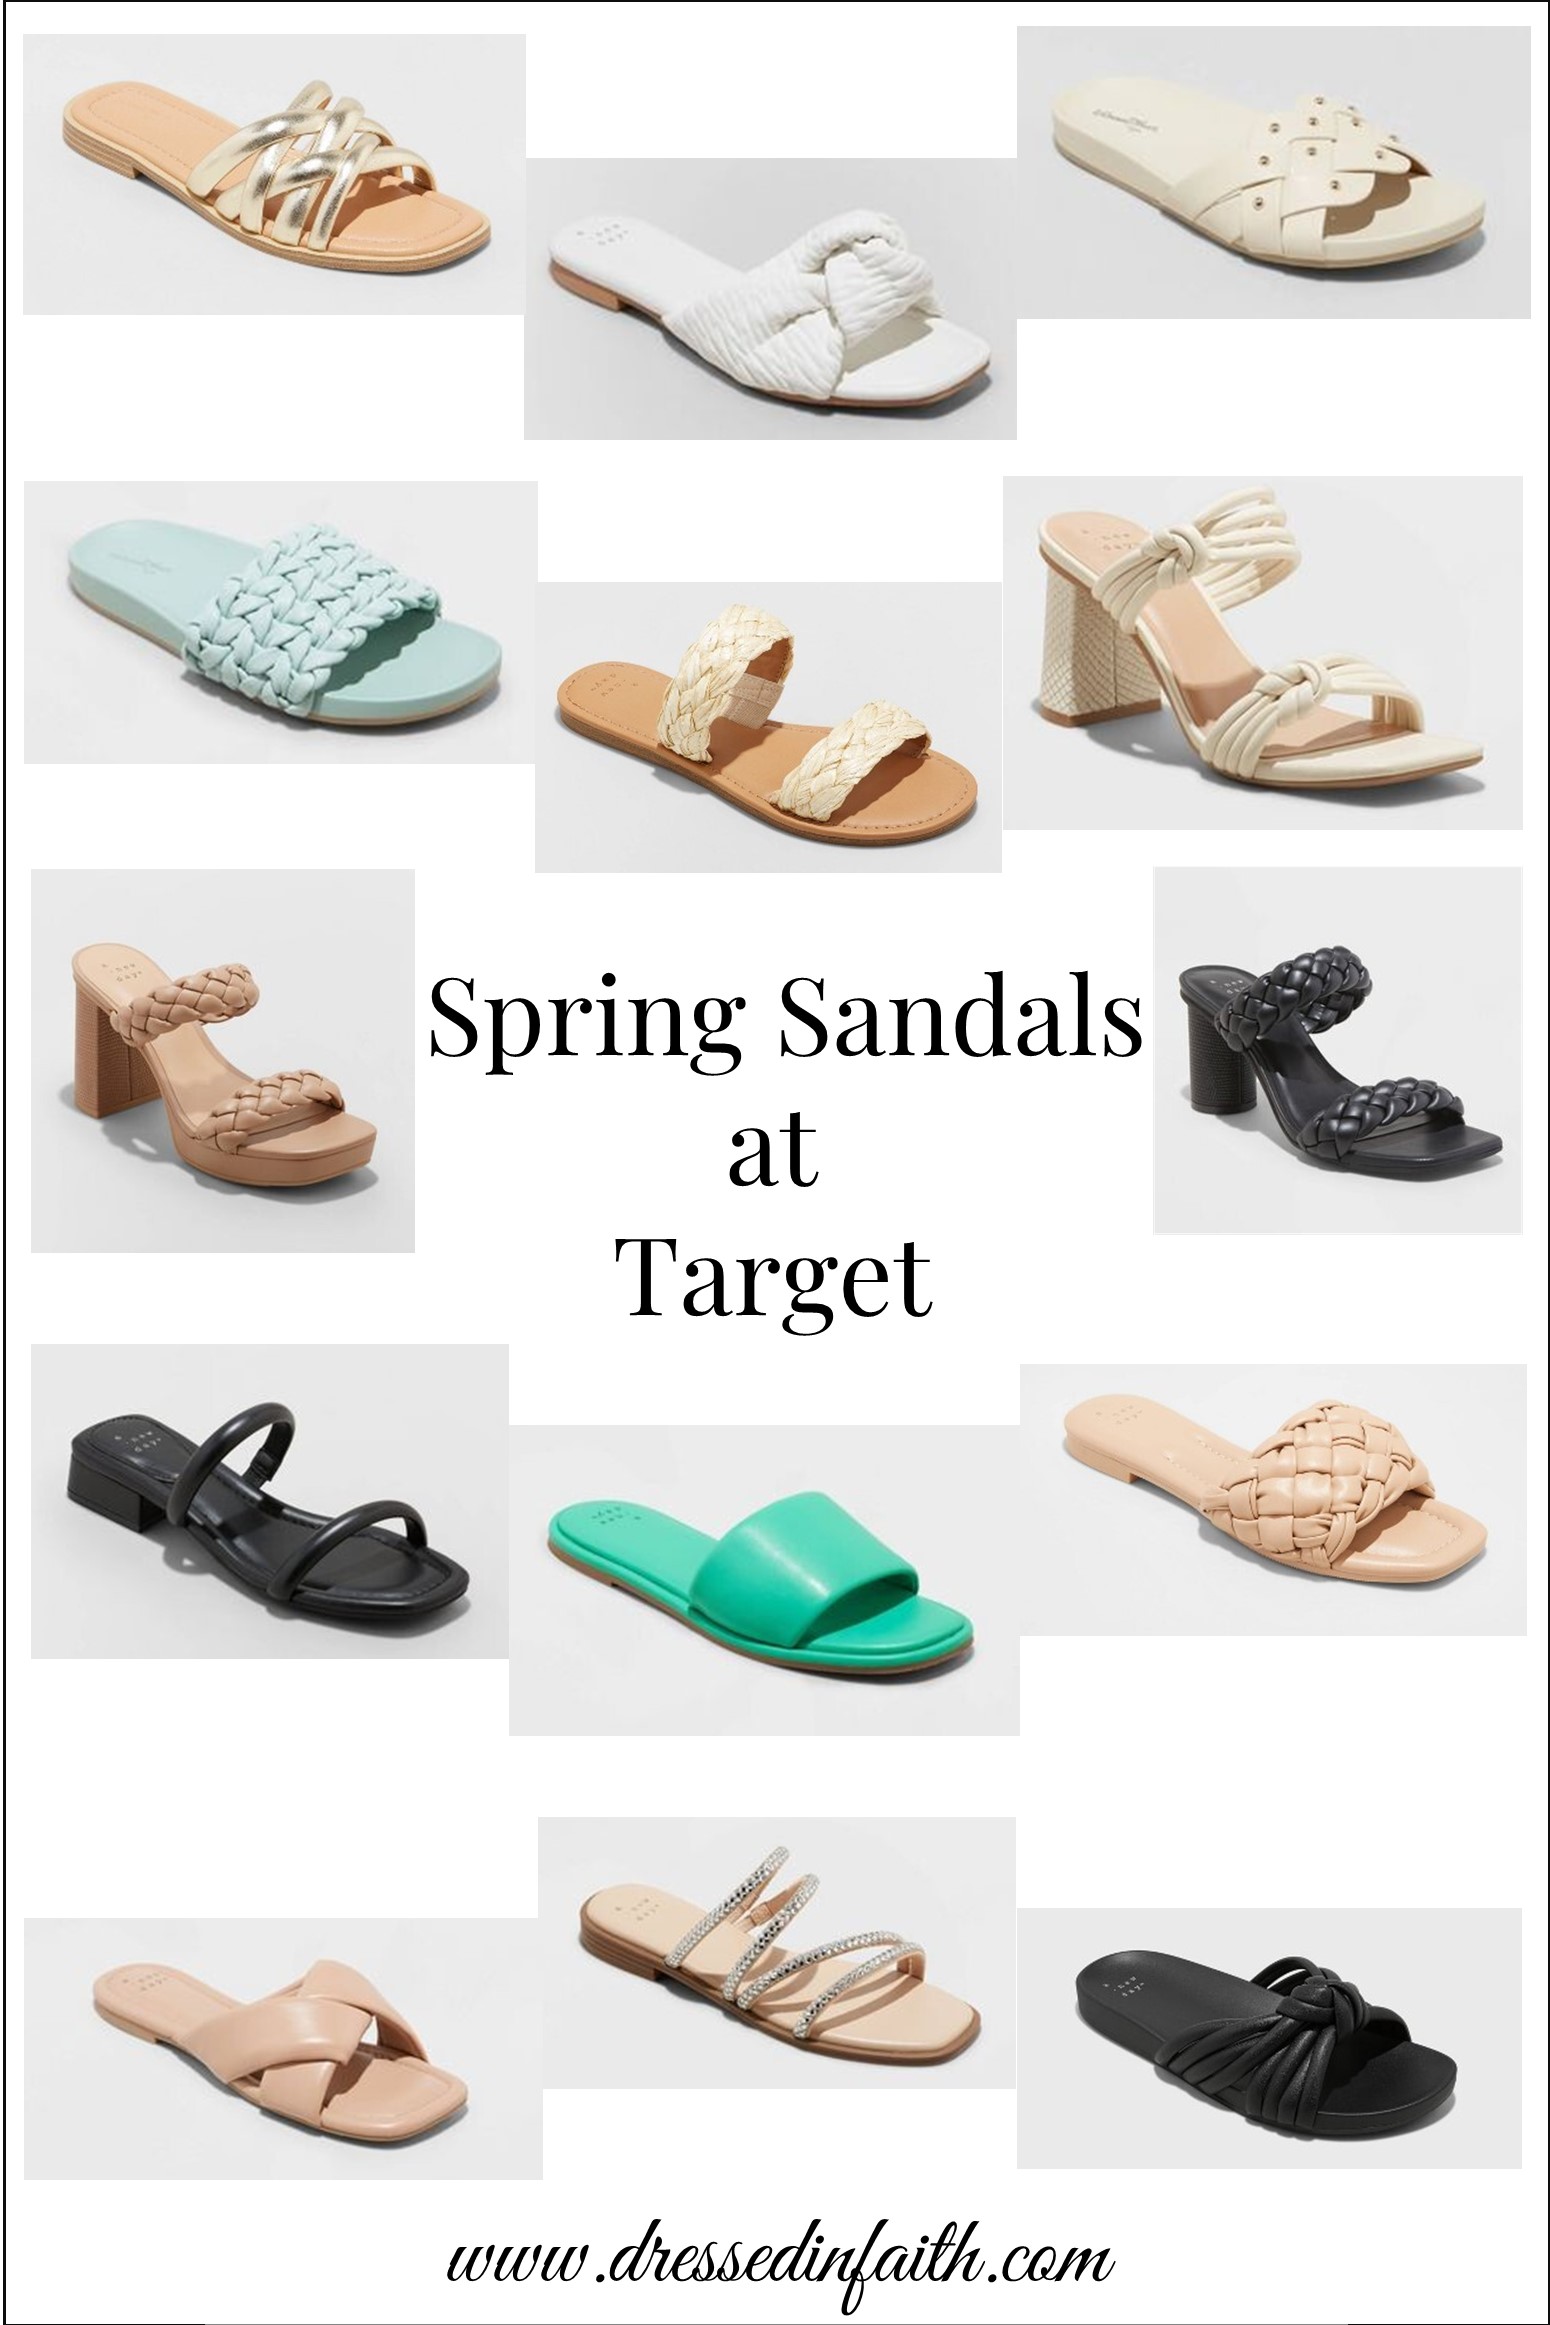 Spring Sandals at Target – Dressed in Faith